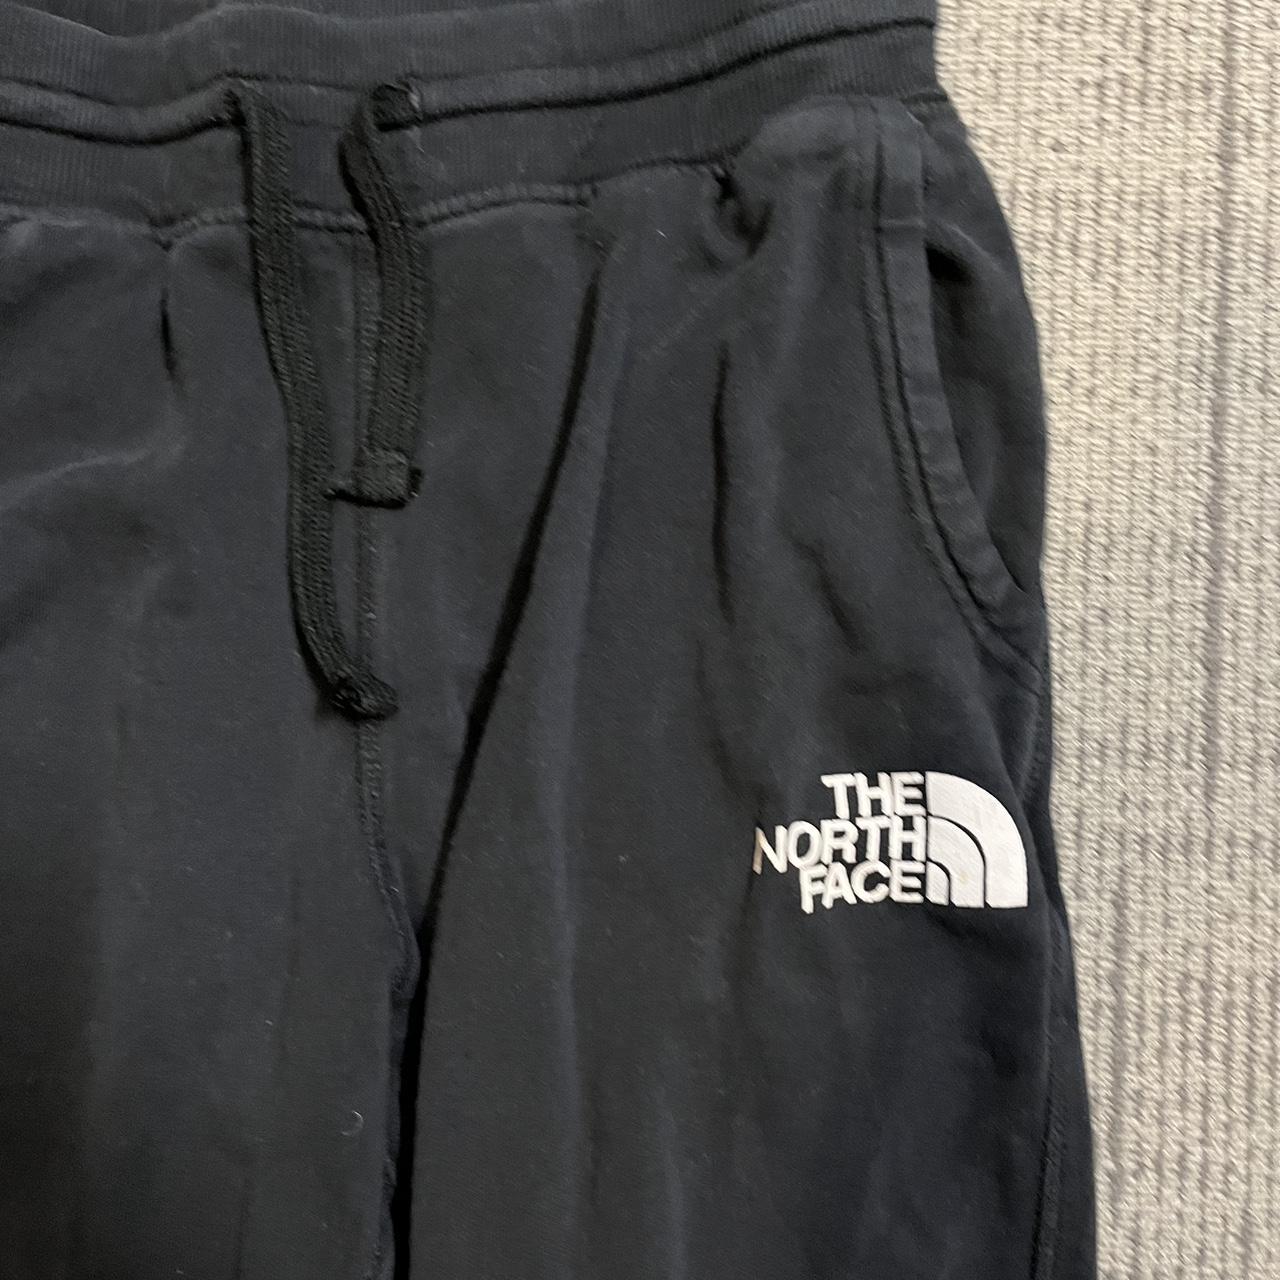 The North Face Men's Black and White Trousers (2)